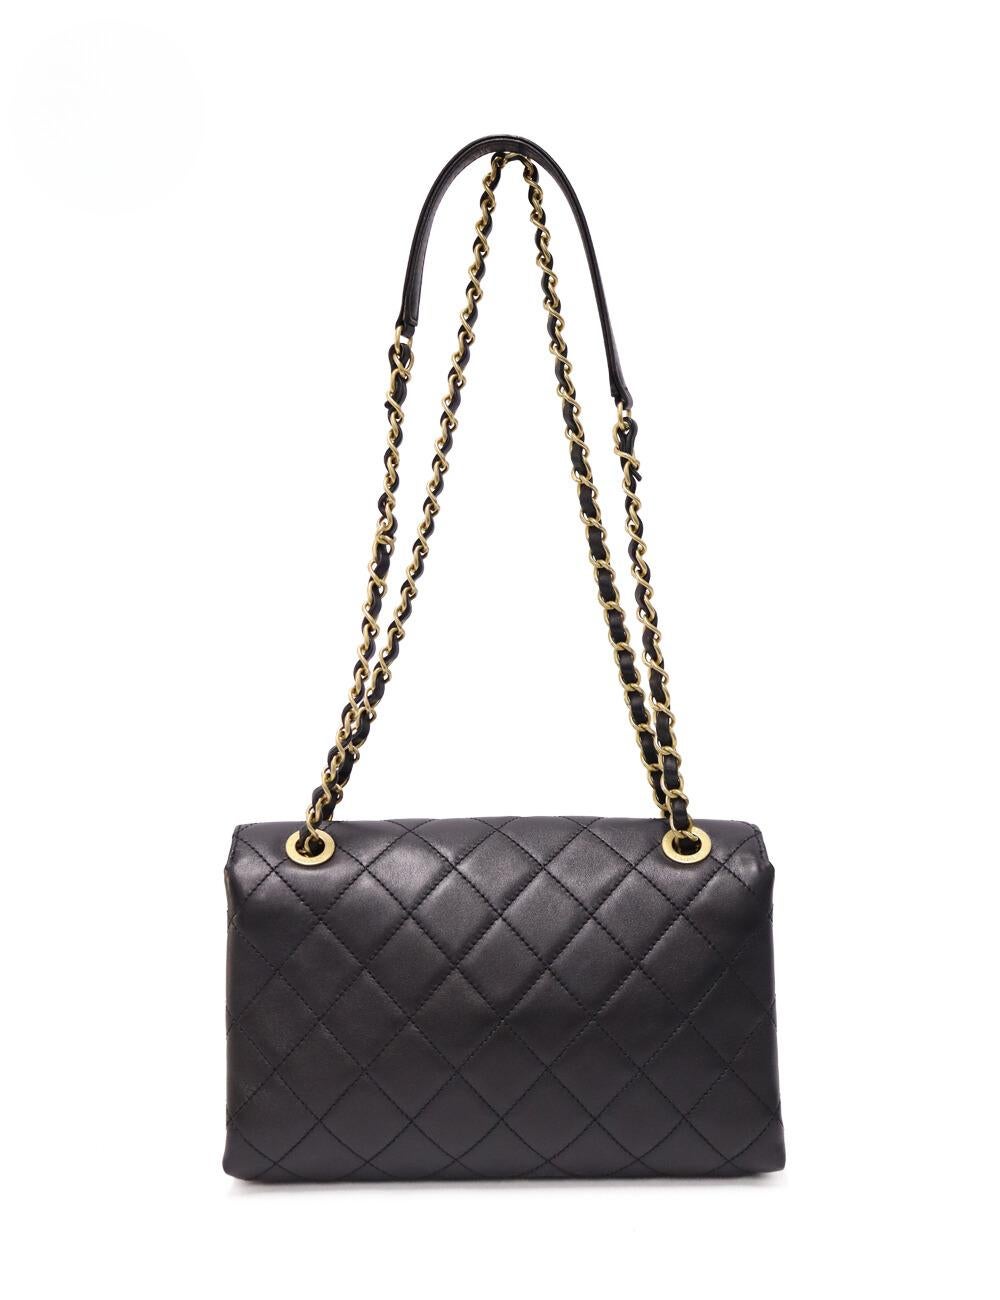 Chanel Calfskin Quilted Enchained Flap Bag For Sale 4